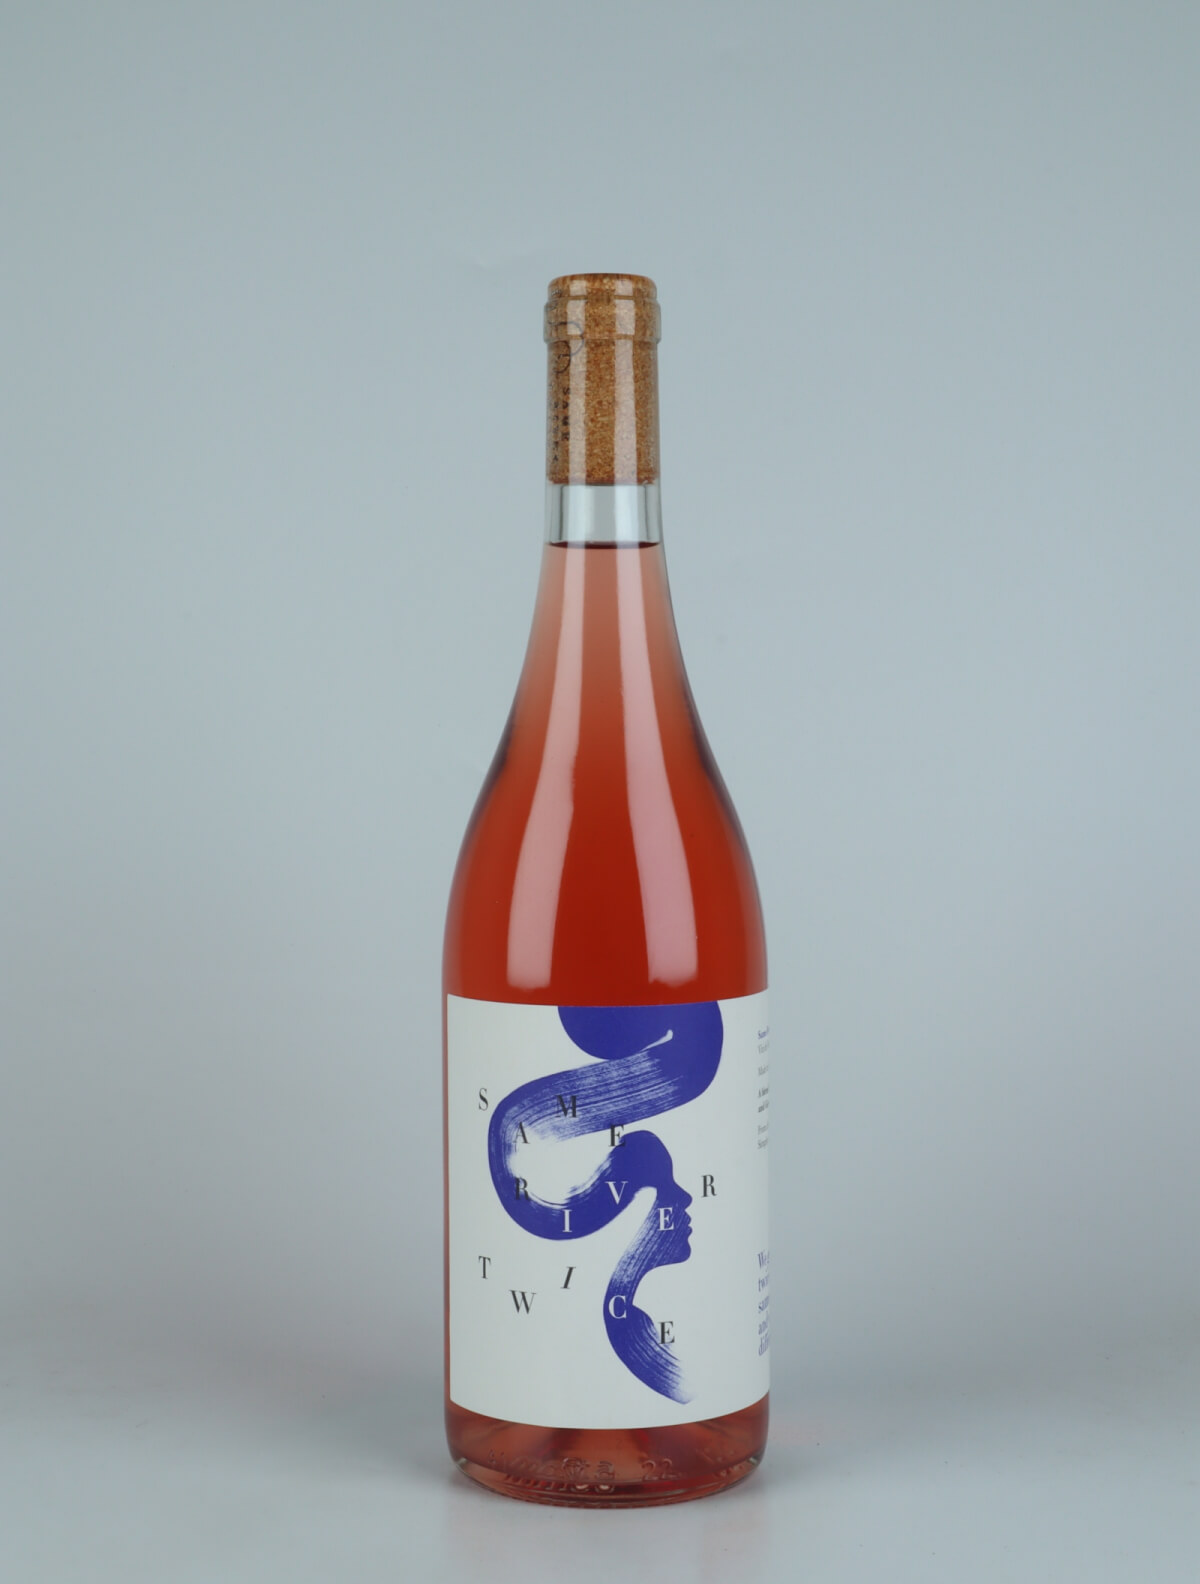 A bottle 2022 Same River Twice Rosé Rosé from Heliocentric Wines, Rhône in France